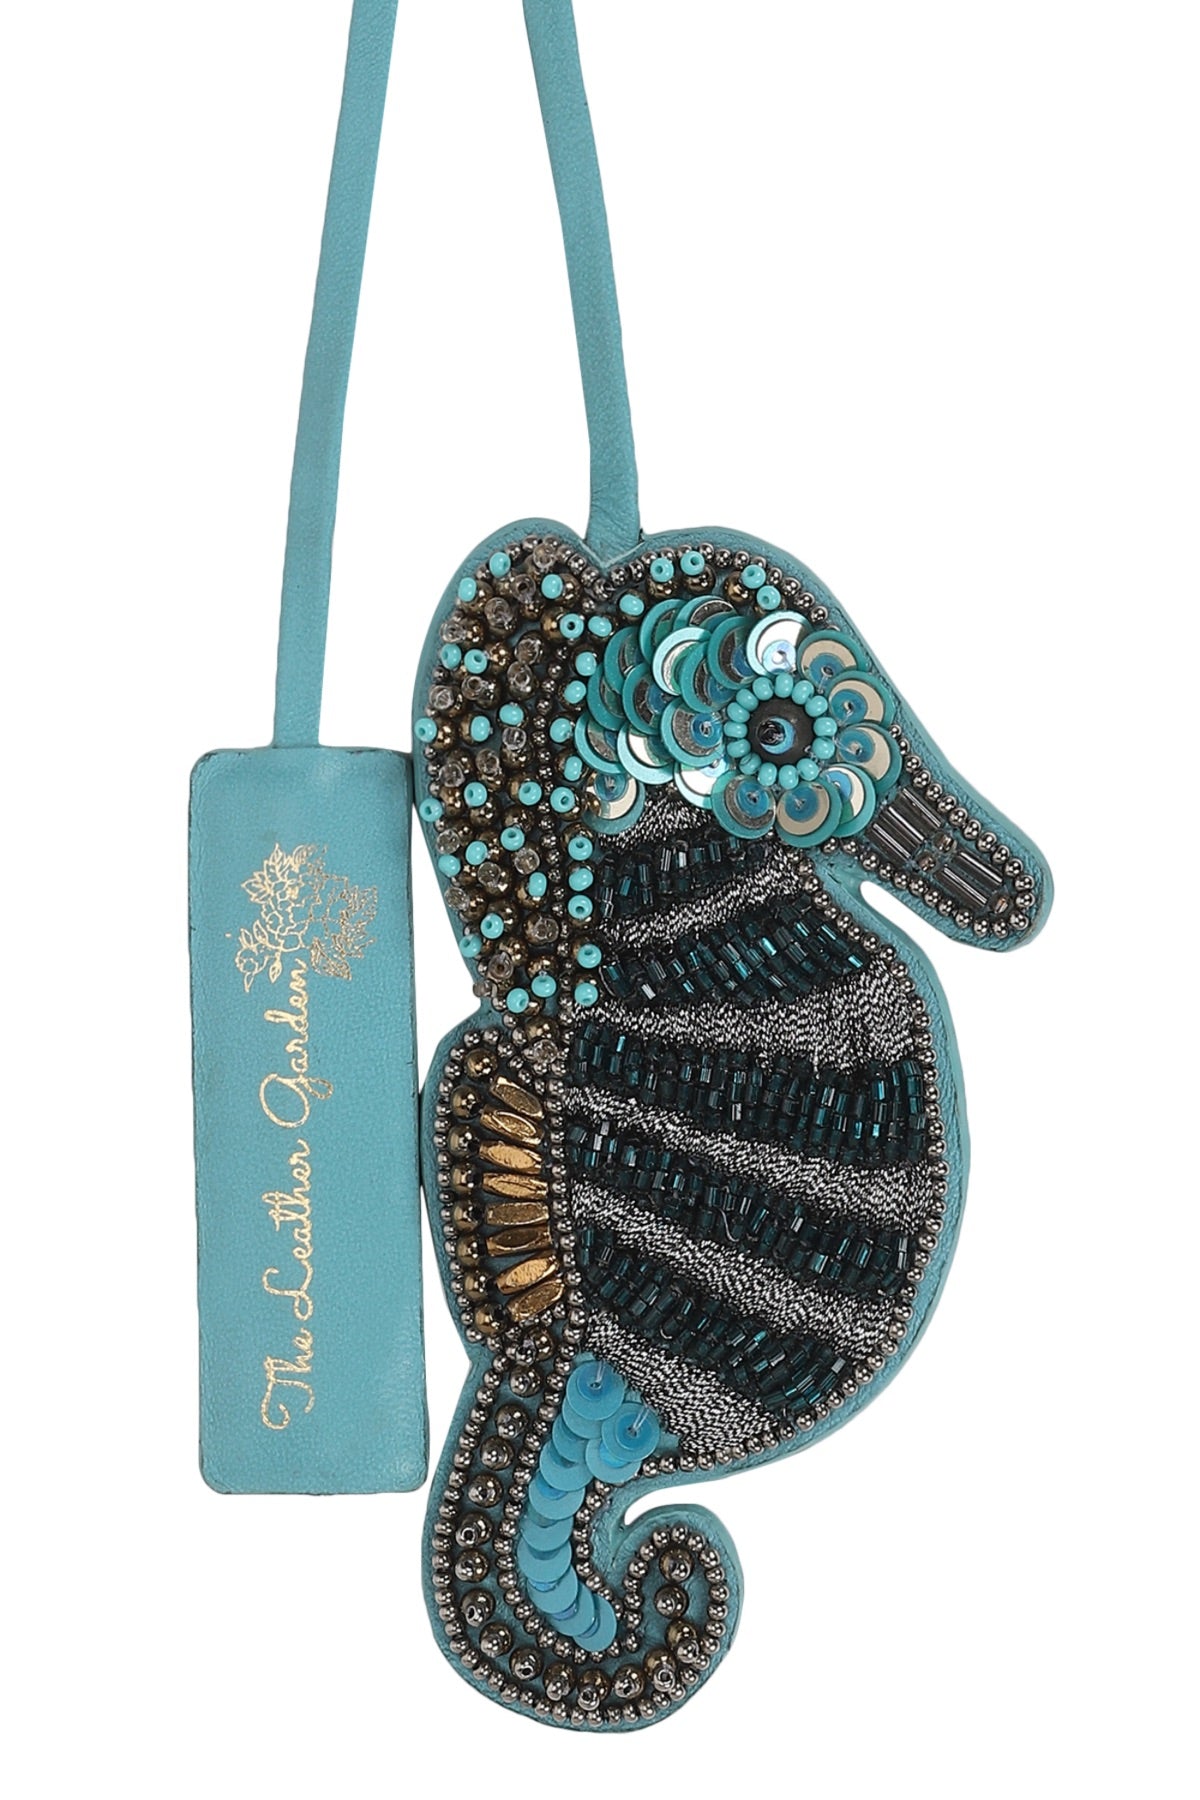 Seahorse Leather Charm - Teal Blue